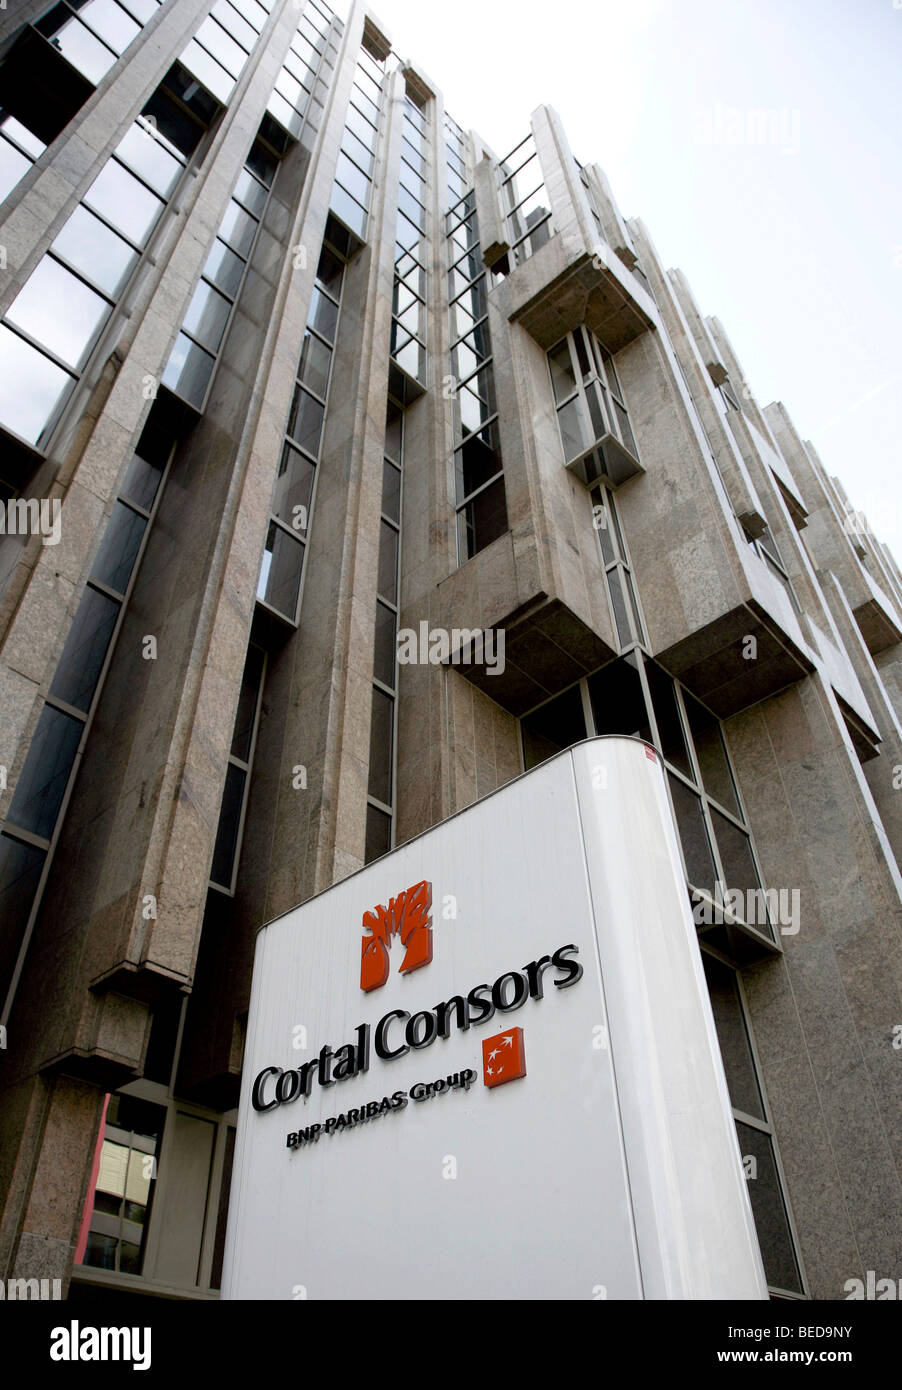 Cortal Consors direct bank, part of the BNP Paribas Group bank, Luxembourg, Europe Stock Photo